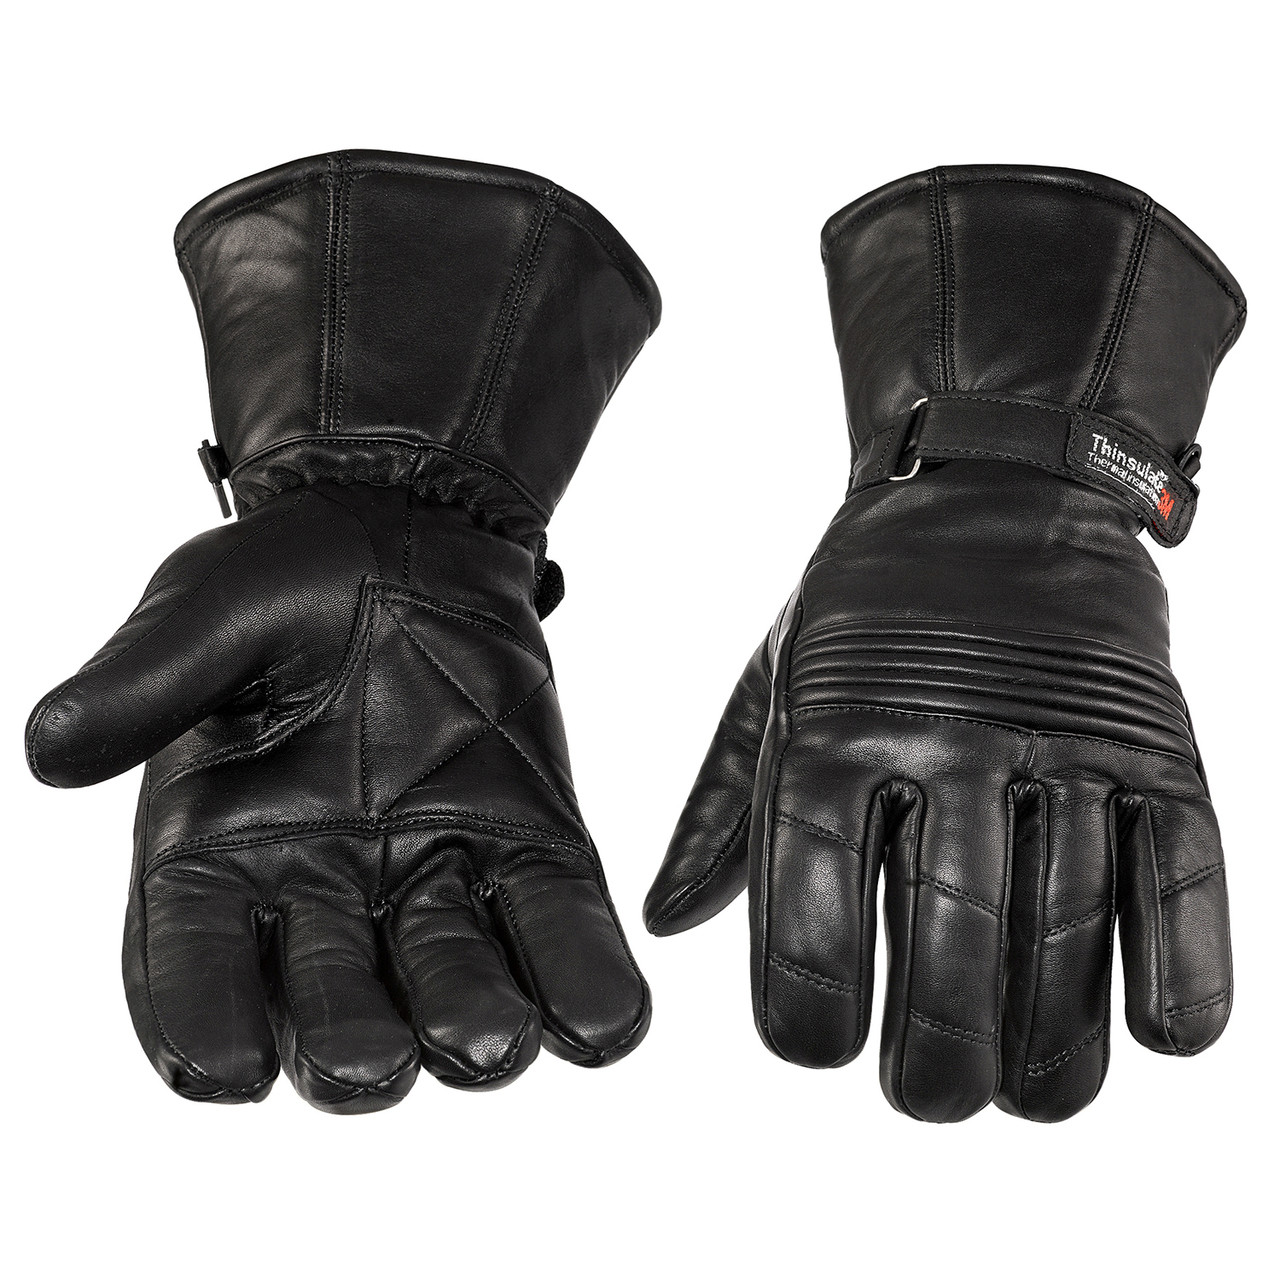 NEW PRODUCT Viking Cycle Men’s Premium Leather Gauntlet Motorcycle Cruiser Gloves X-Large 